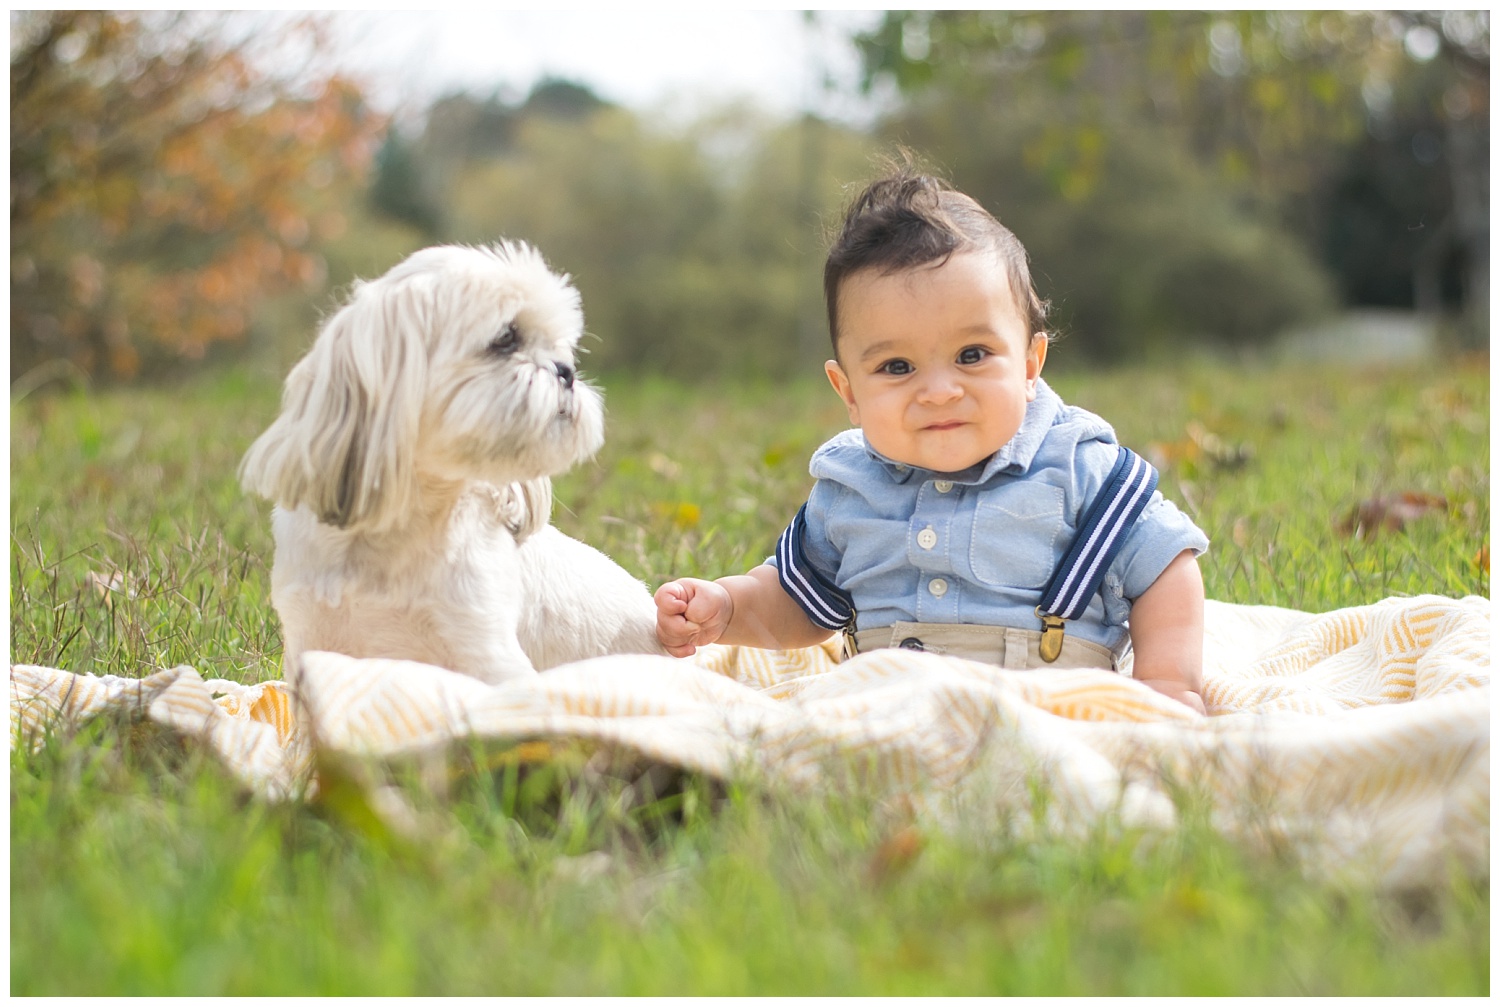 this is an image of a six month old baby boy sitting outside on a blanket next to their family dog. the child is smiling and looking at the camera.